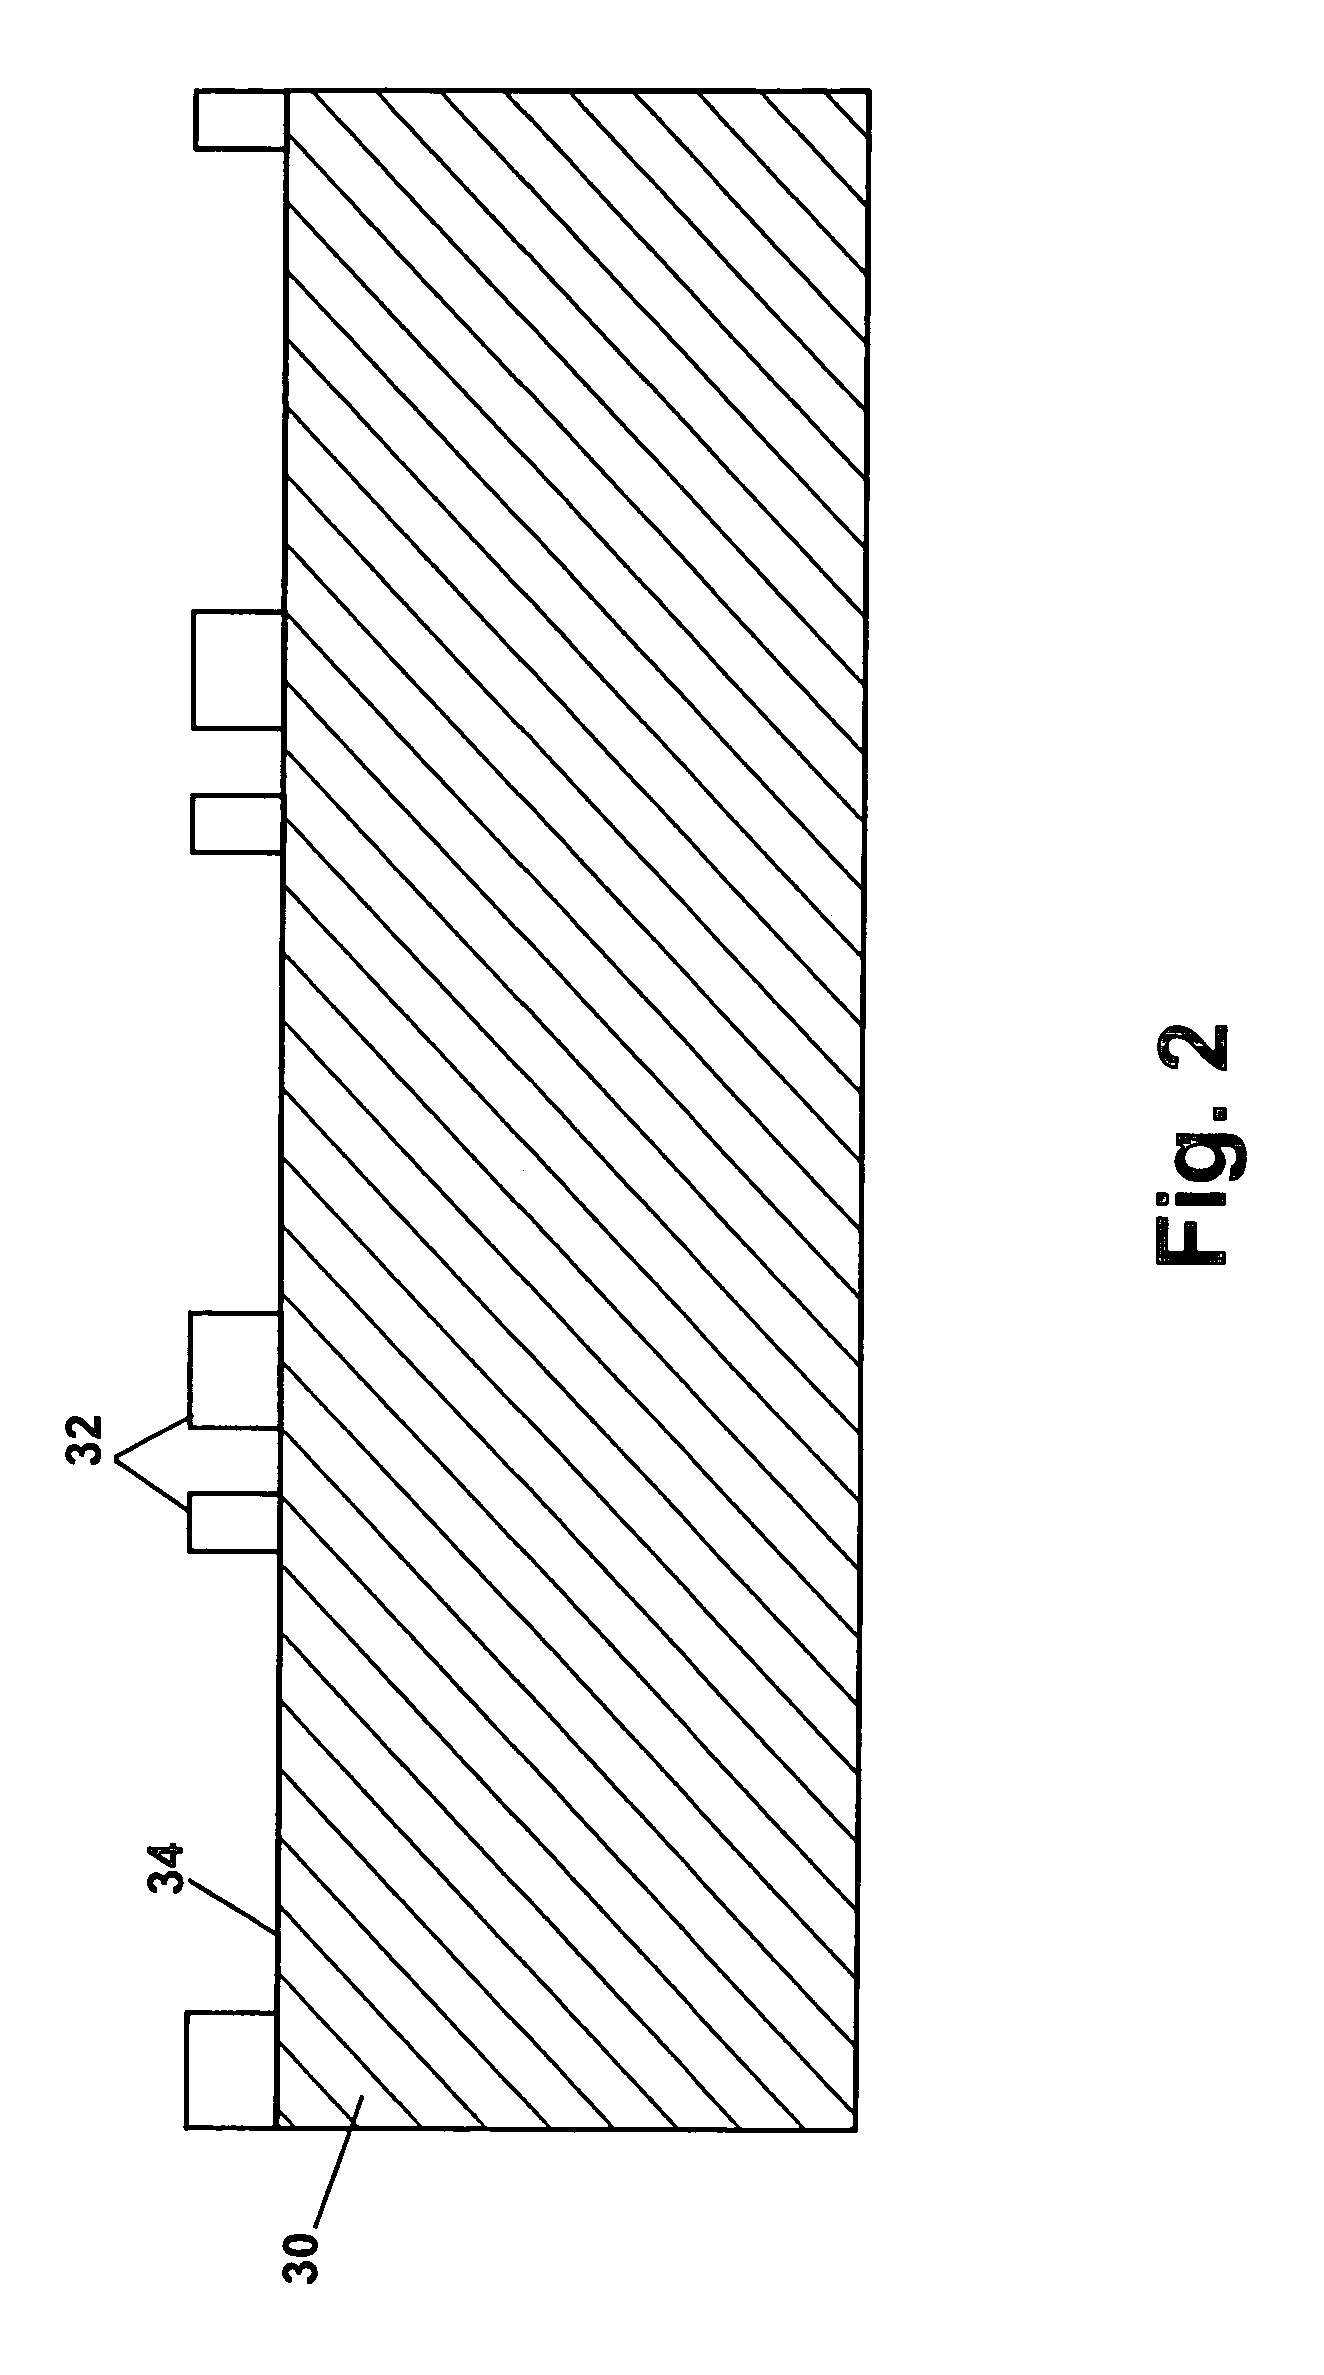 Method to generate electrical current using a plurality of masses attached to piezoceramic supports